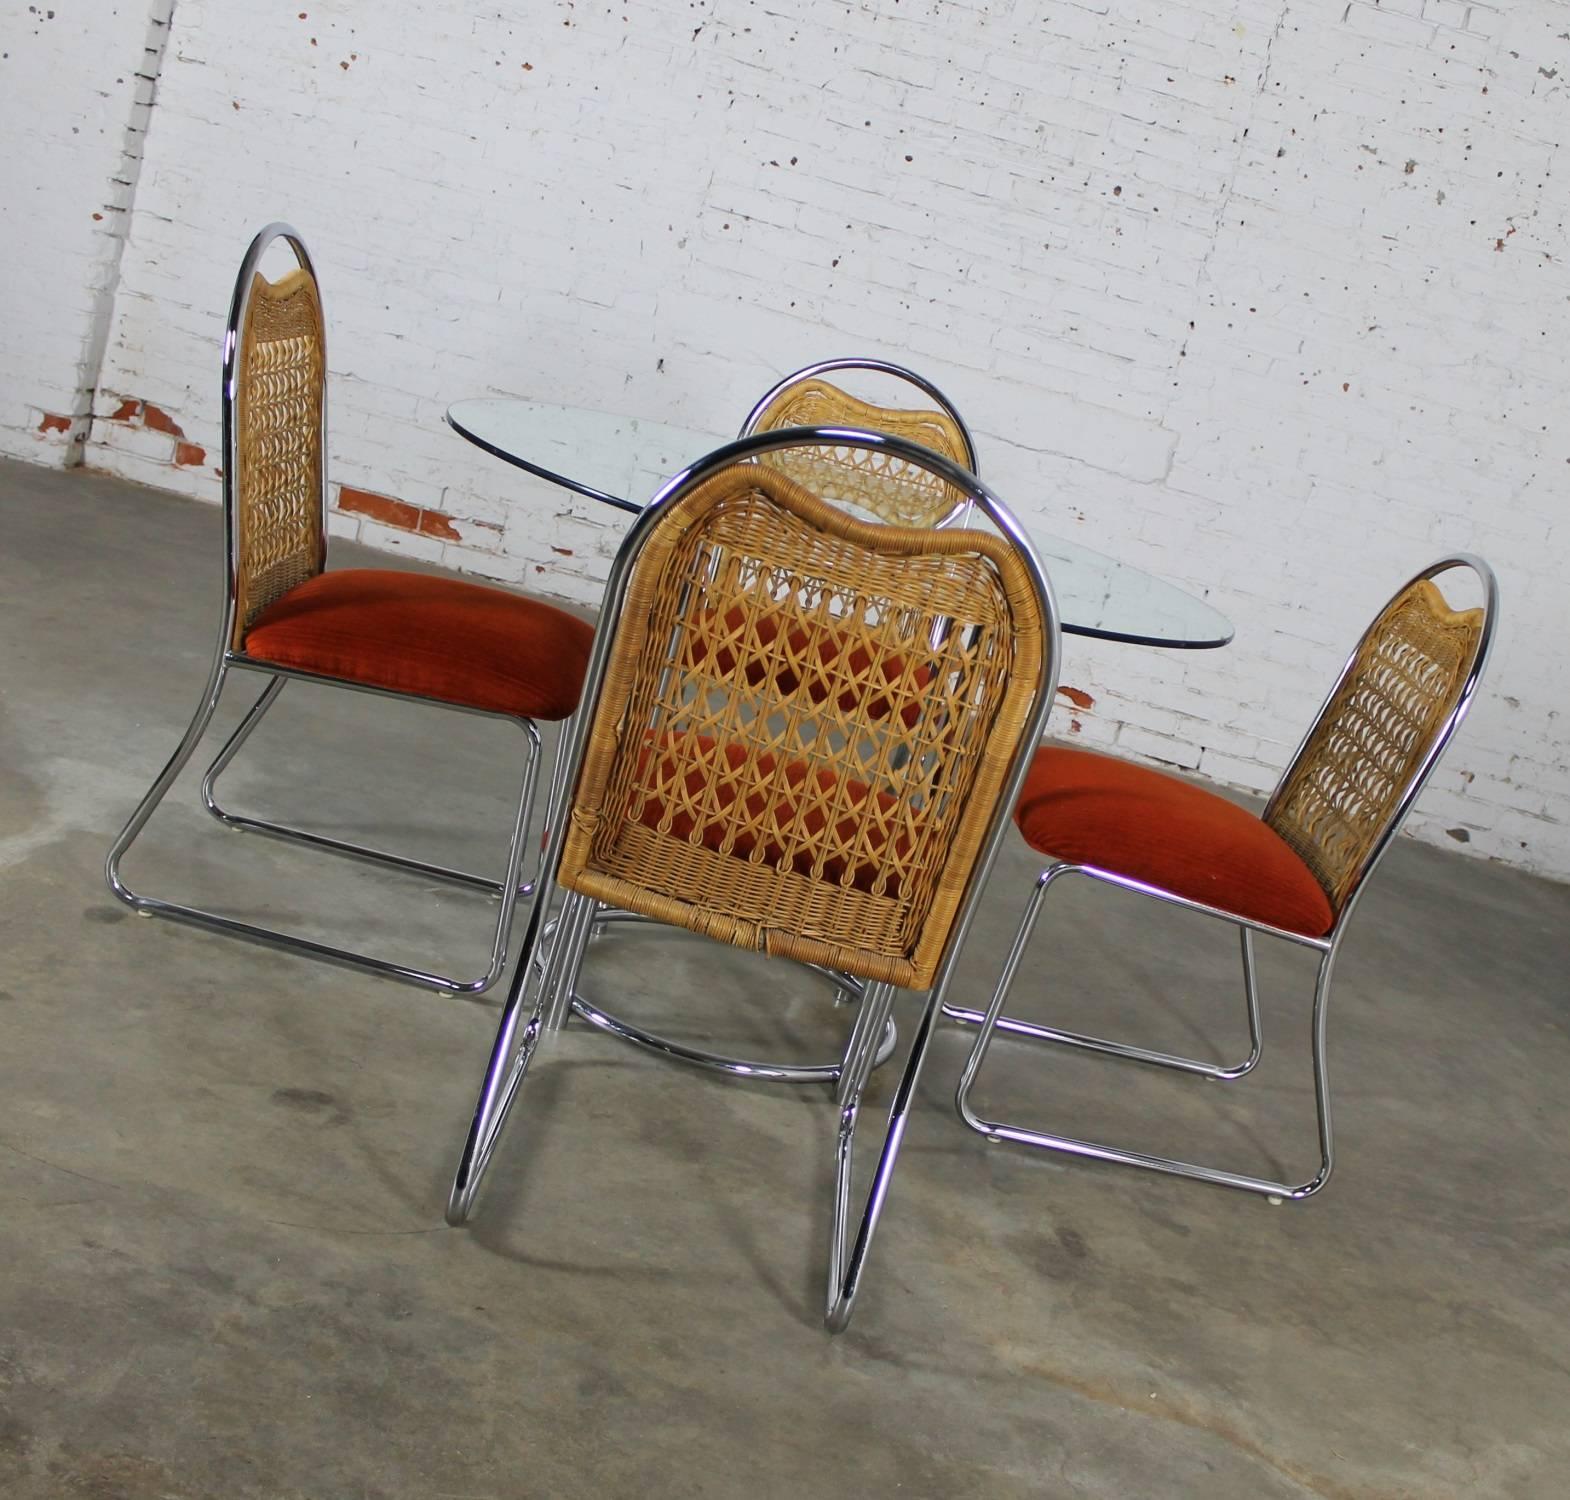 Fabulous vintage Modern dinette set by Daystrom Furniture featuring a round glass top chrome base table and four chairs with arched top chrome frames, wicker inset backs, and orange fabric upholstered seats, circa 1980 and in great vintage